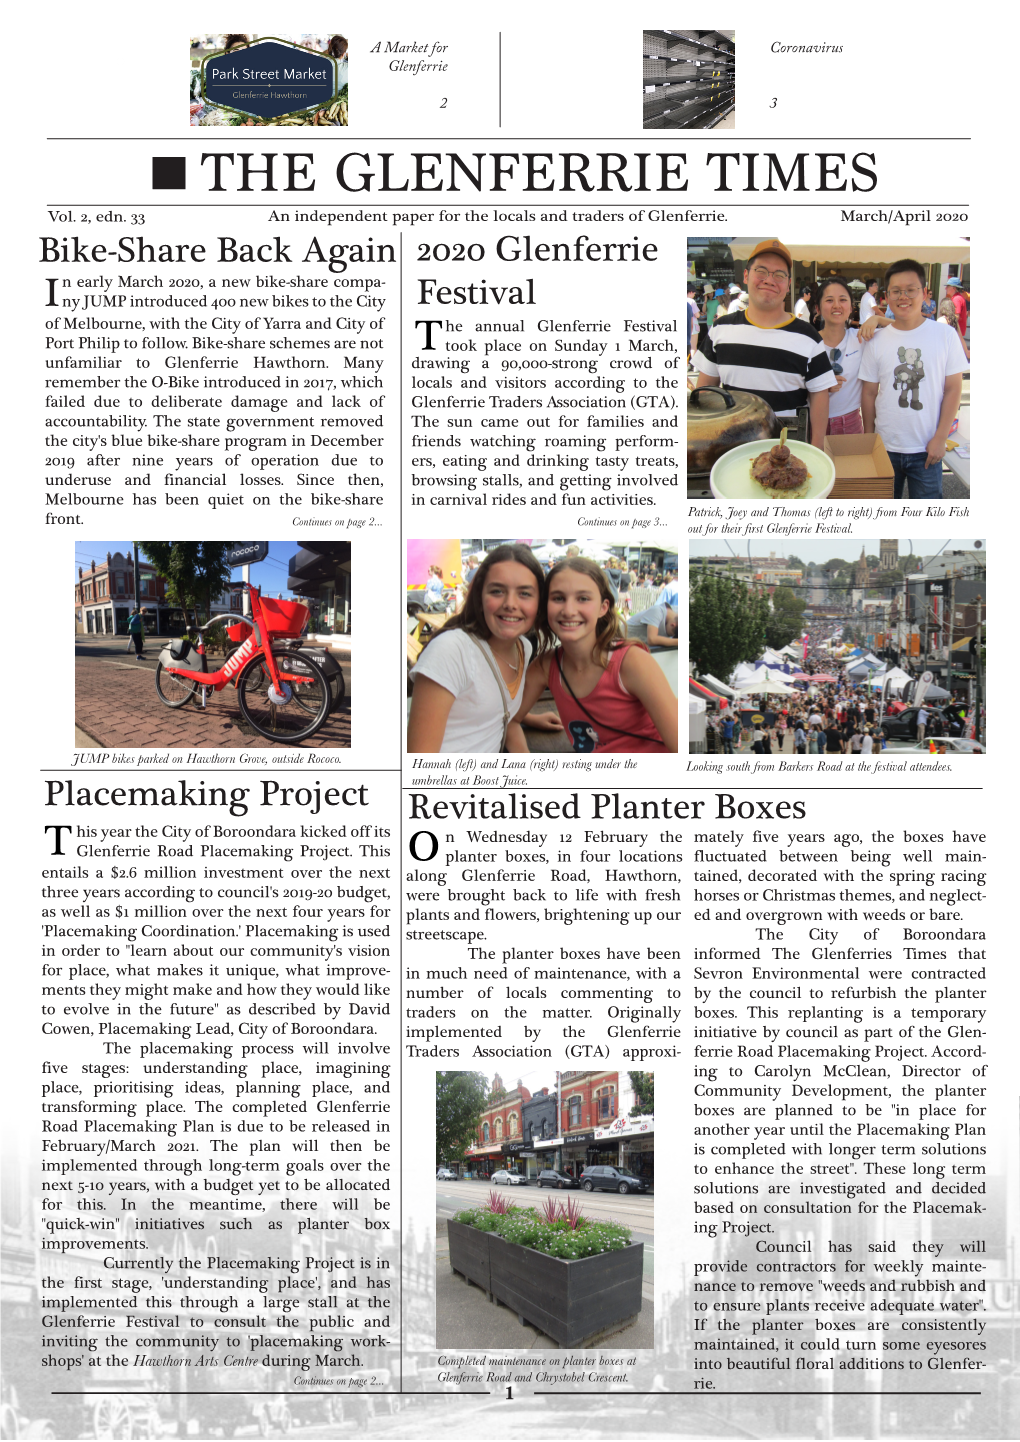 THE GLENFERRIE TIMES Vol